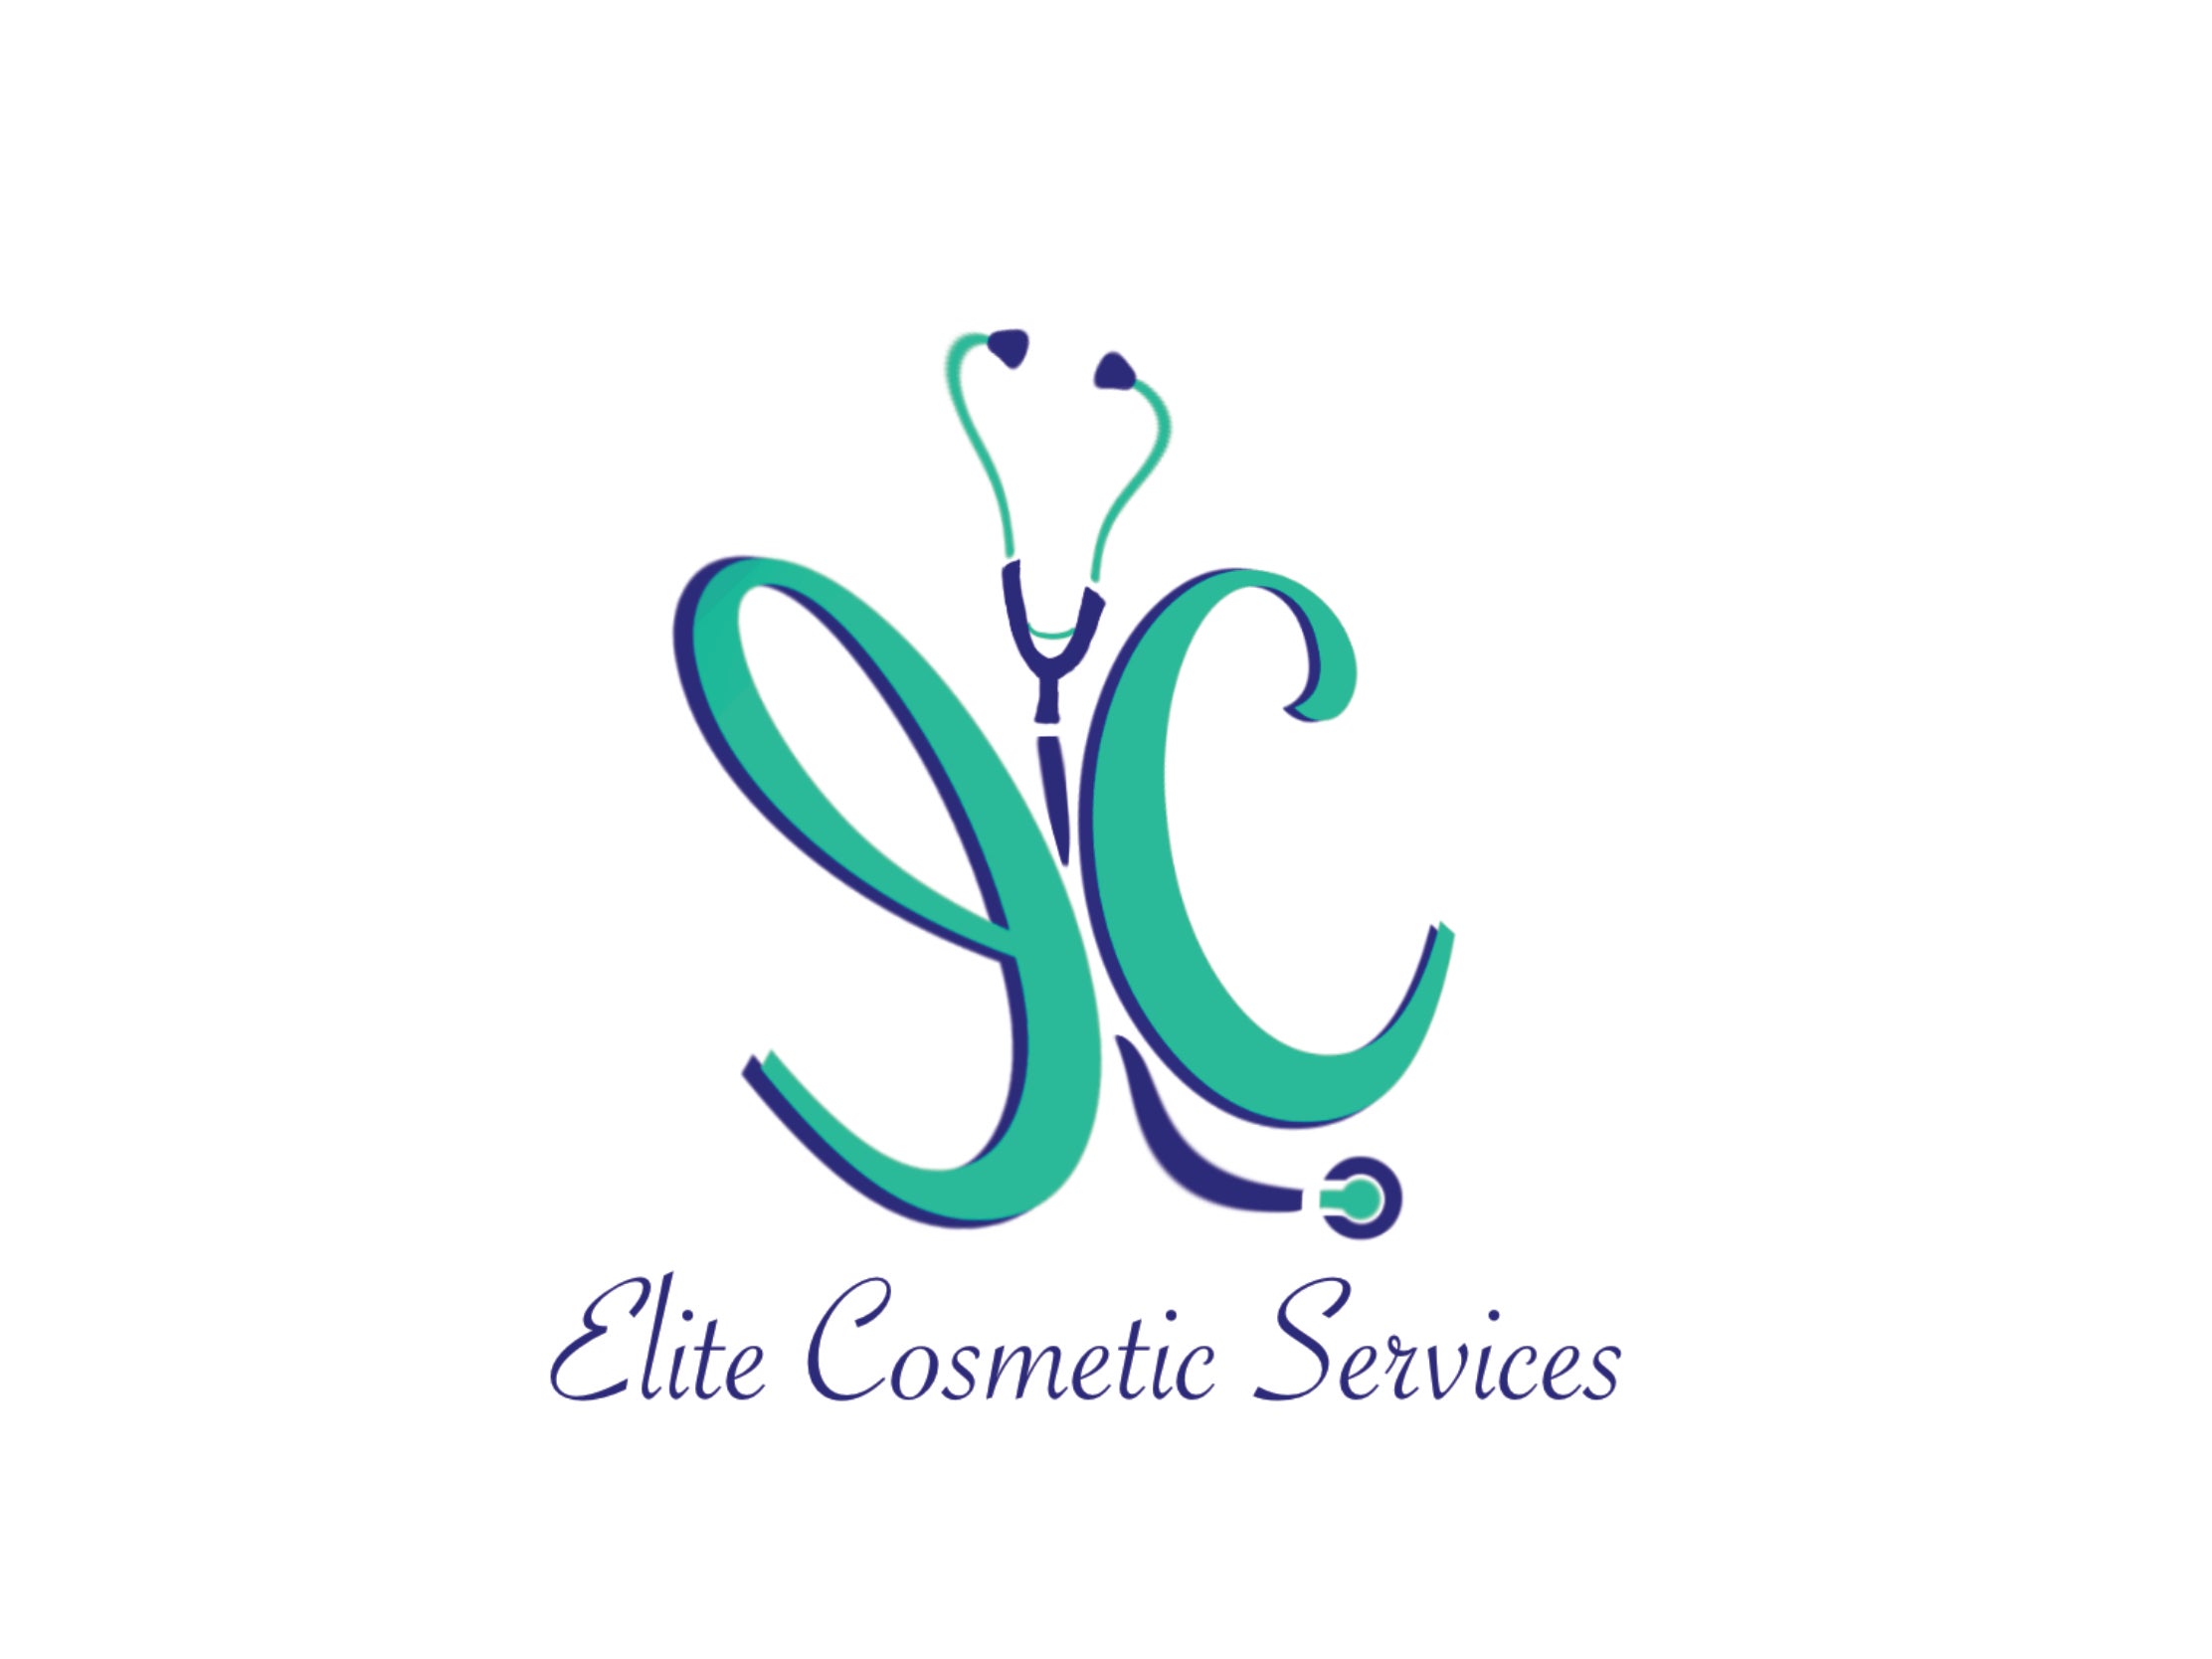 The Healthcare Cosmetology Companies - Home